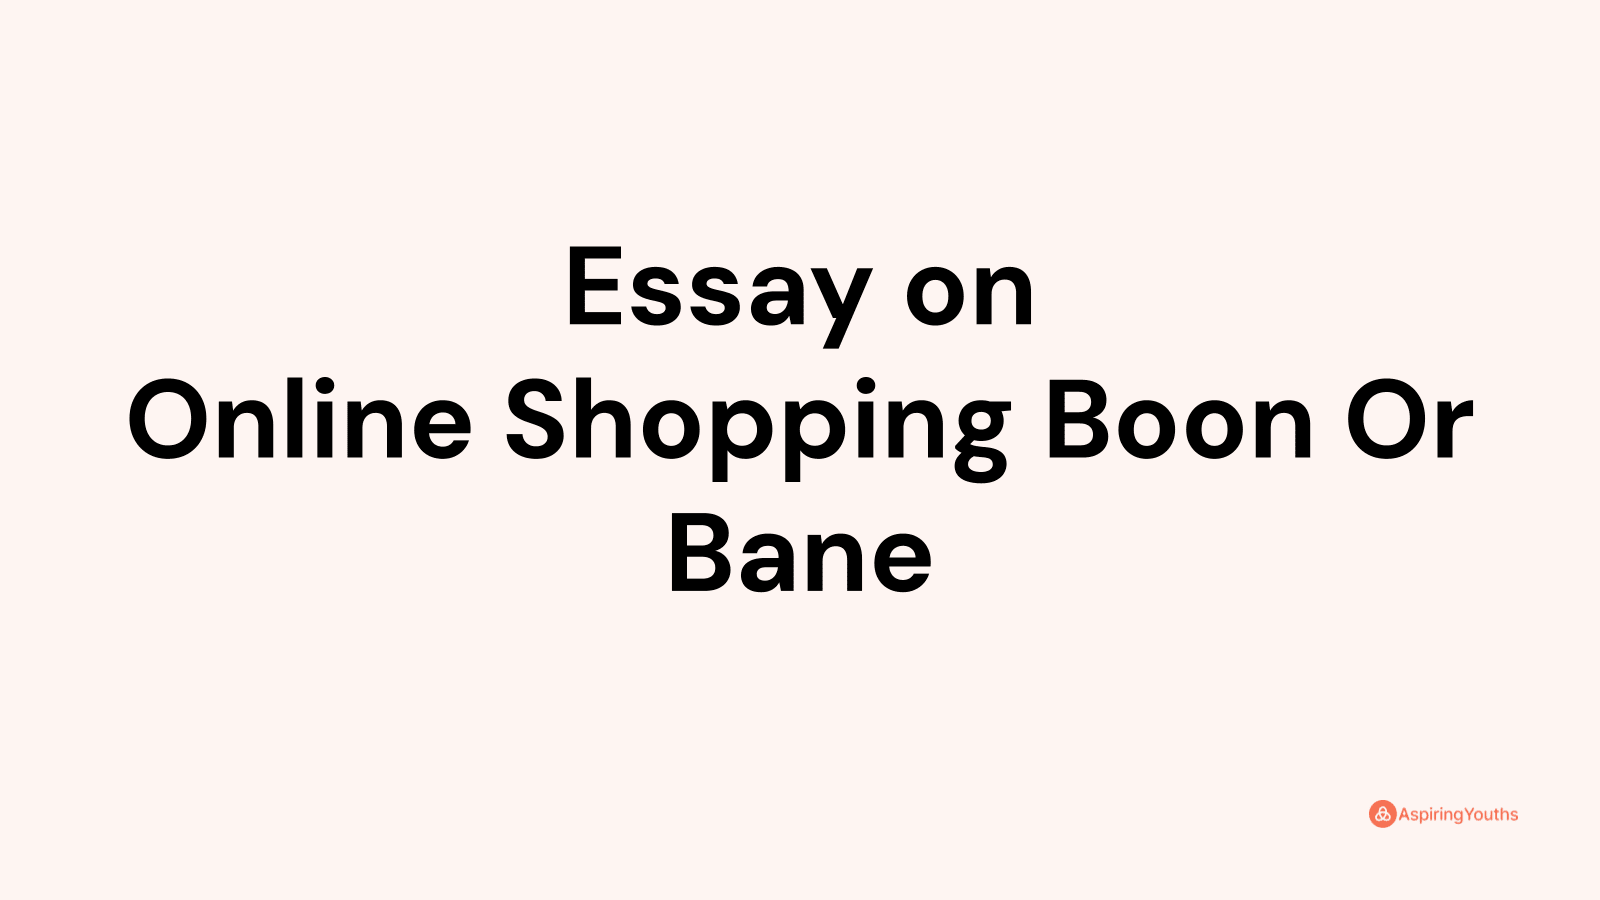 online shopping boon or bane essay